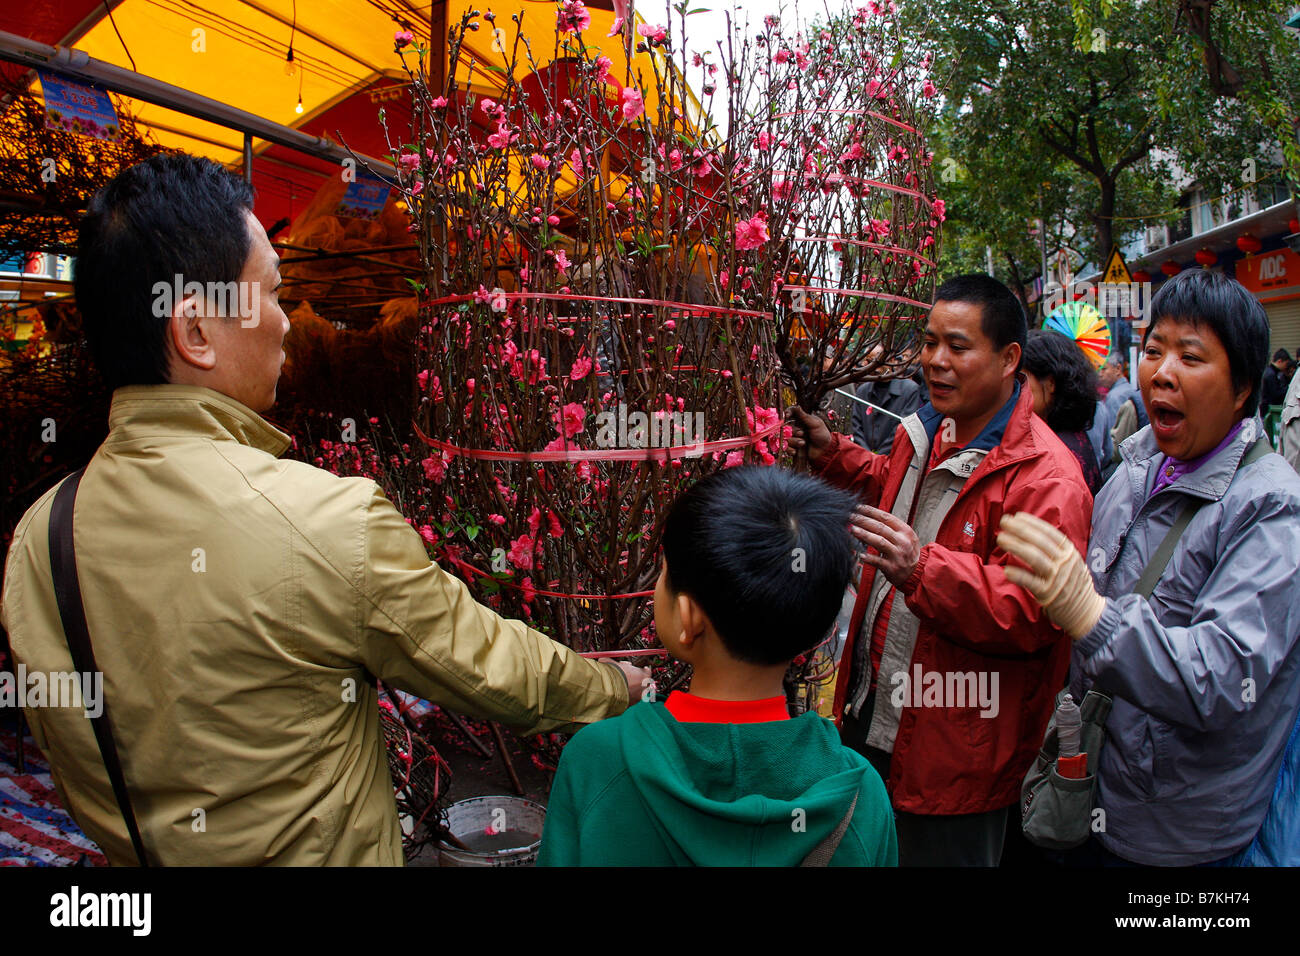 Chinese shoppers haggling over prices at local market Stock Photo